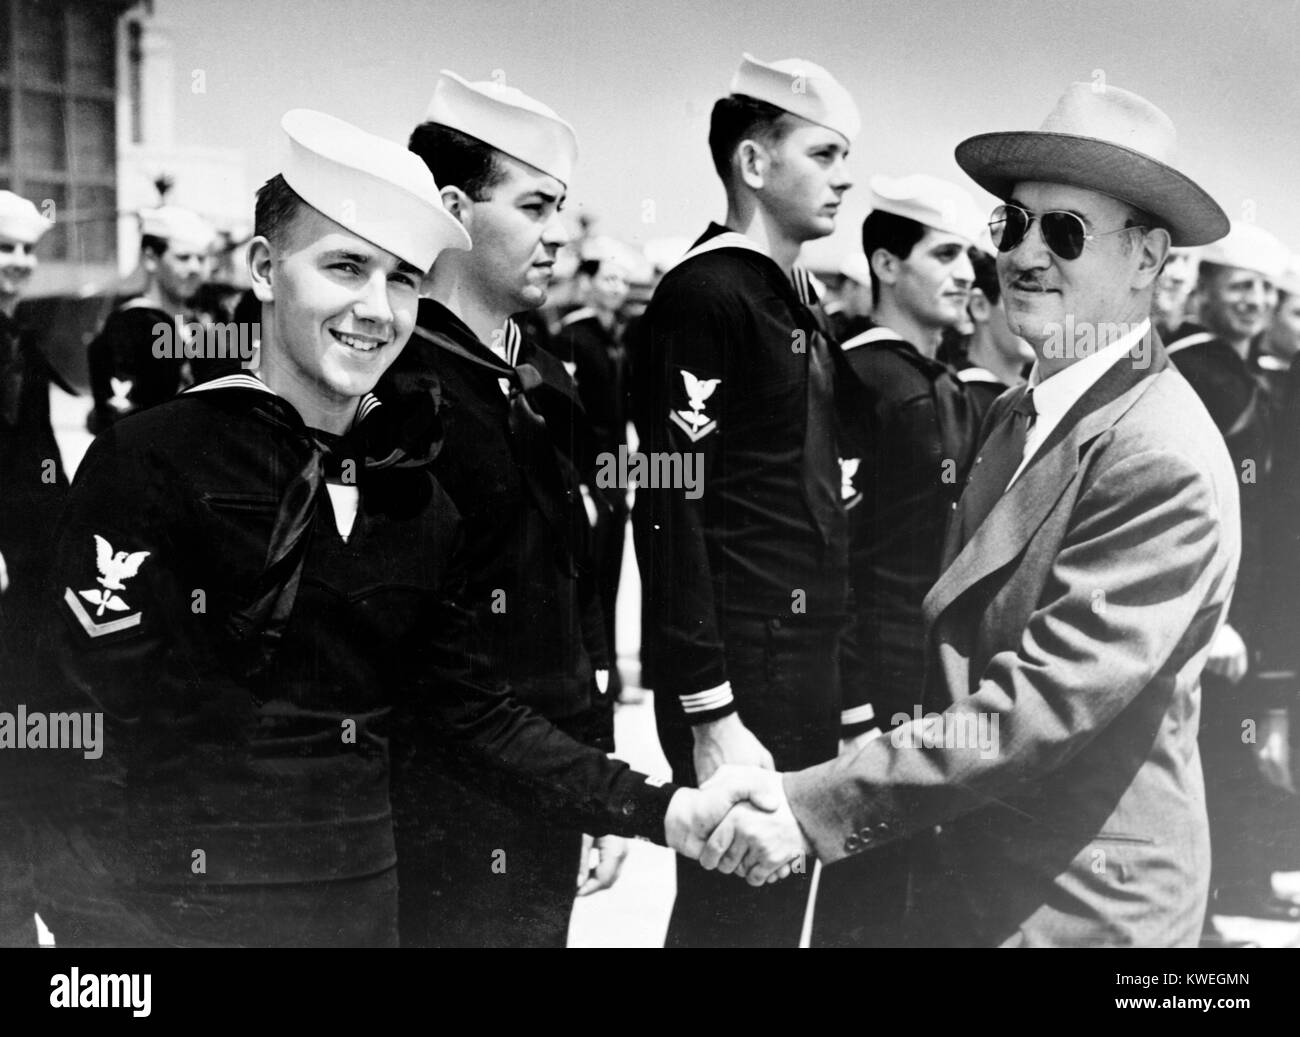 Igor Sikorsky (1889 - 1972) developer of the first successful helicopter, shakes hands with his son, Sergei, who is training at a US Coast Guard Air Station near New York City, on 22nd November 1944. The Russian born inventor was attending a demonstration of the use of the Sikorsky Helicopter for air-sea rescue operations. Stock Photo